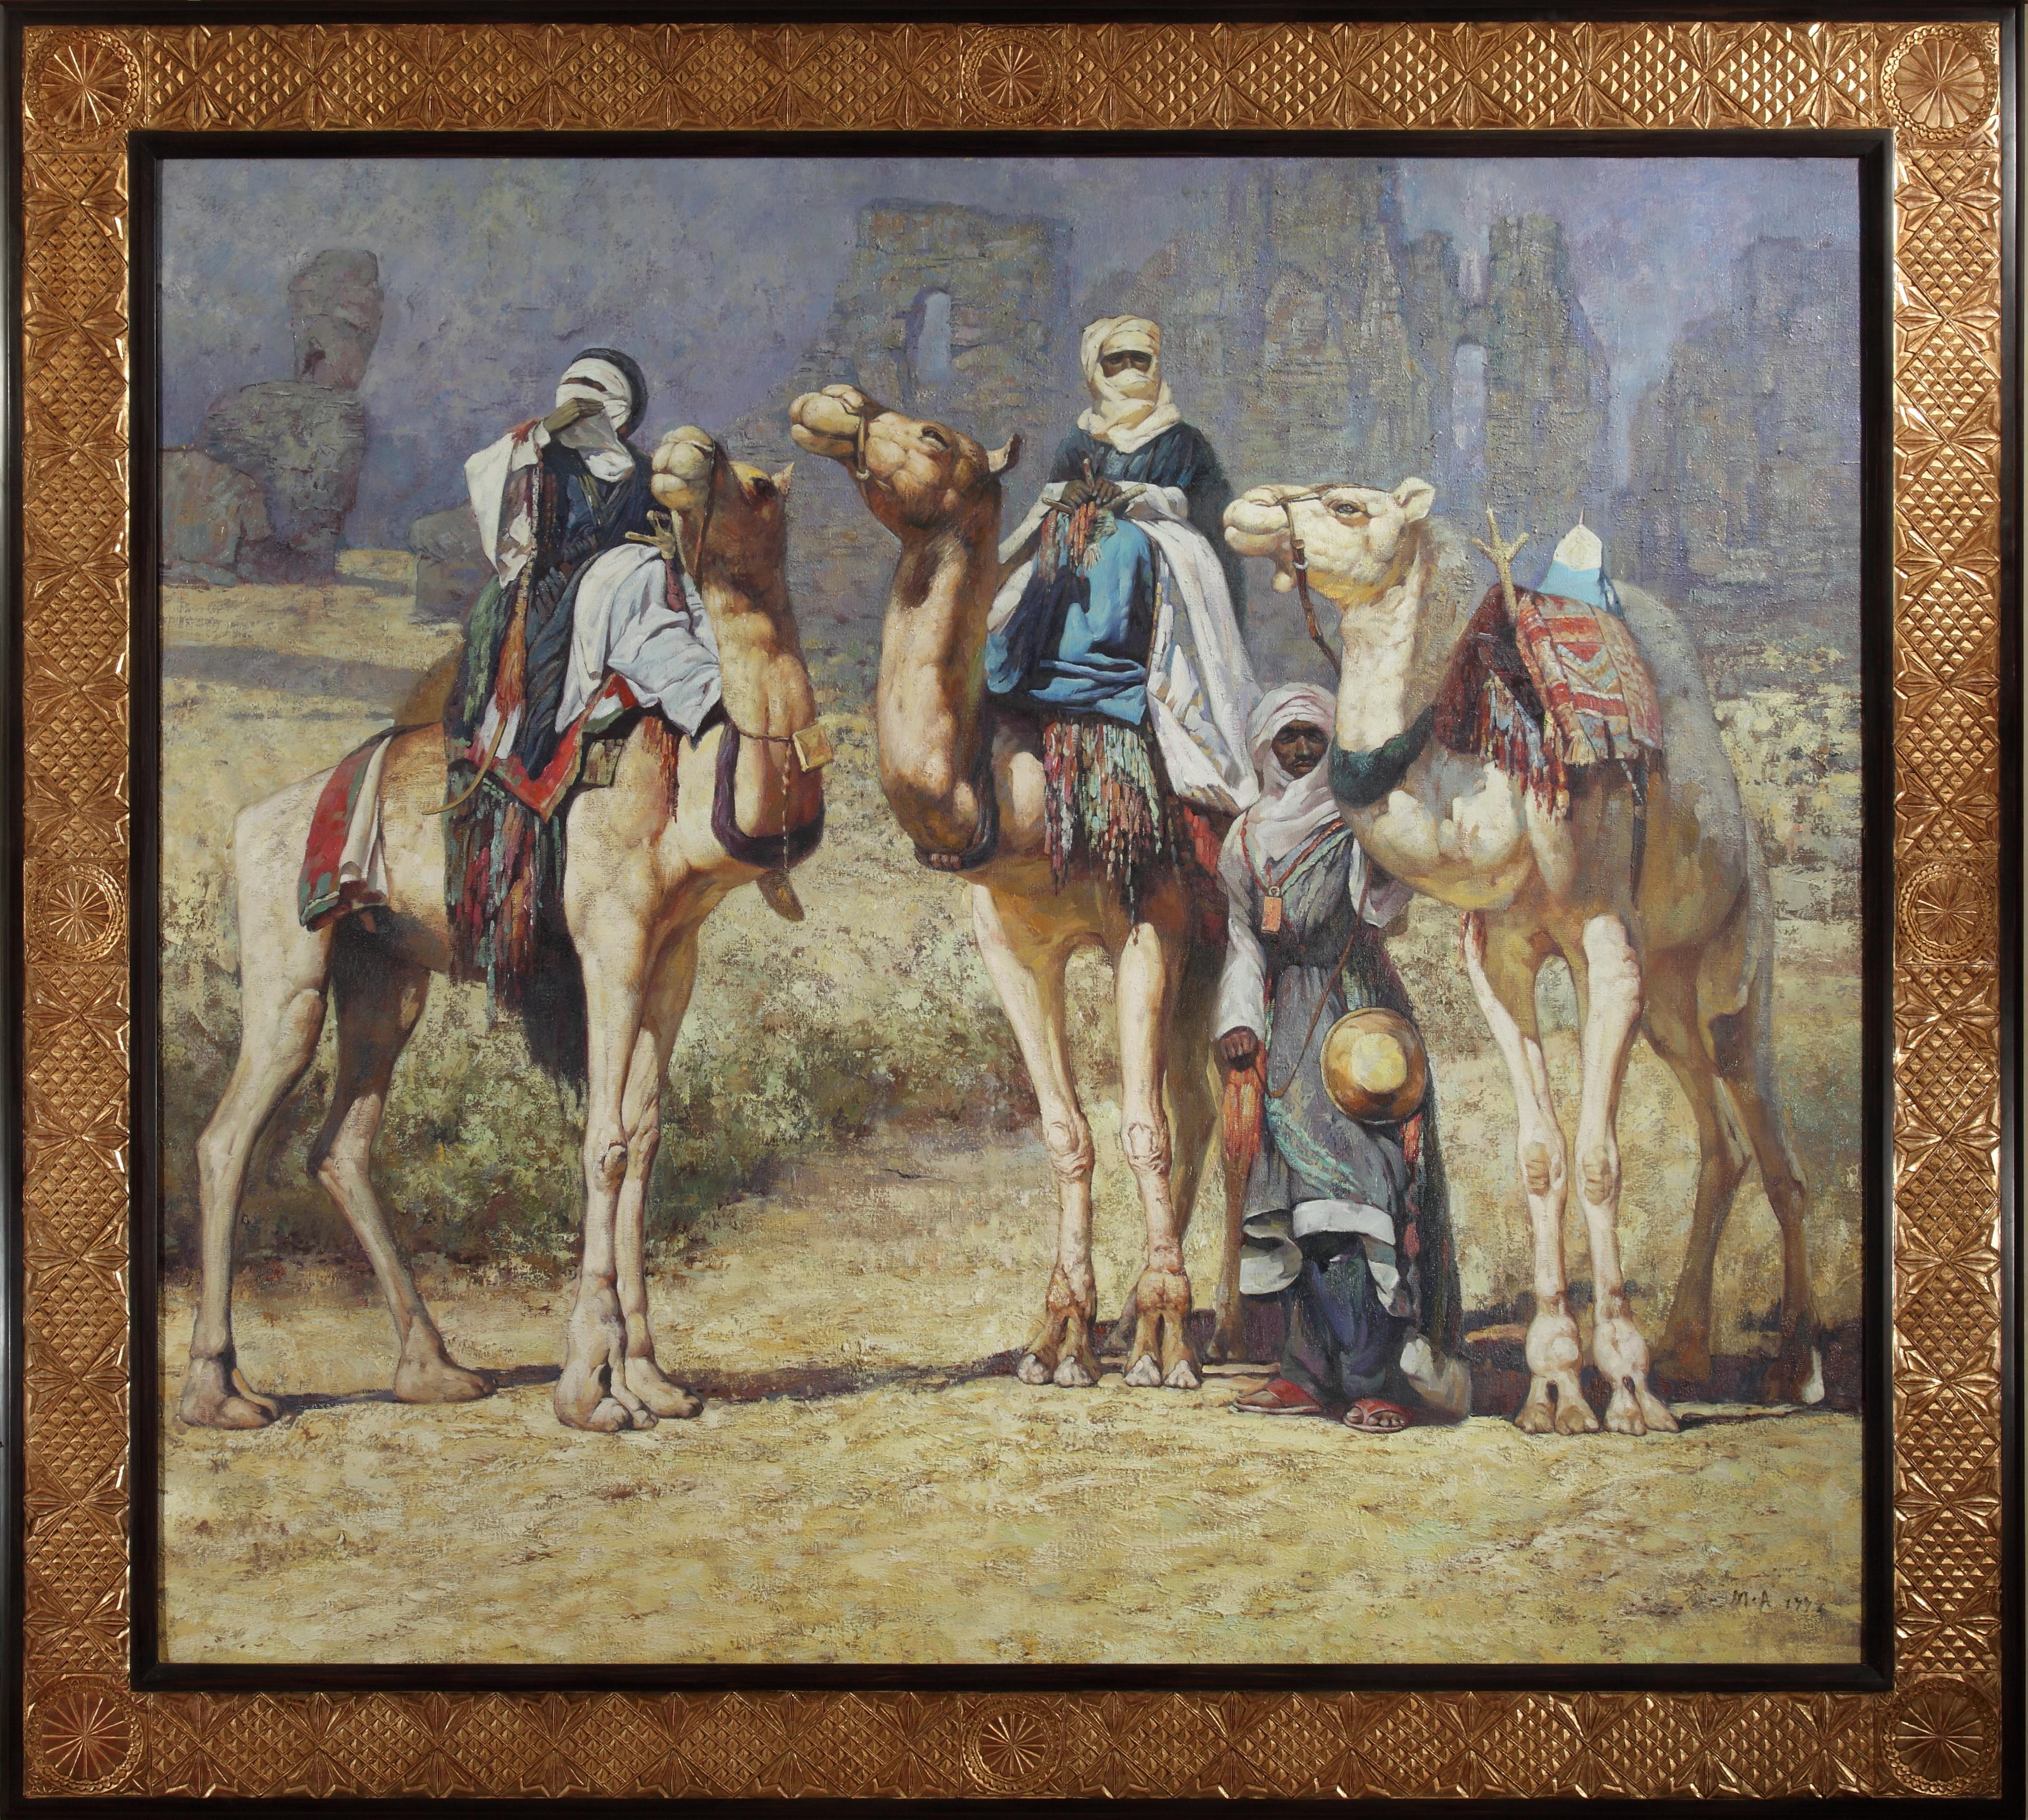 Large Orientalist painting, lovely framed, representing a group of three nomads and their camel in a rocky desert setting bathed in sunlight.

Carry an unreadable signature down right.

The word 